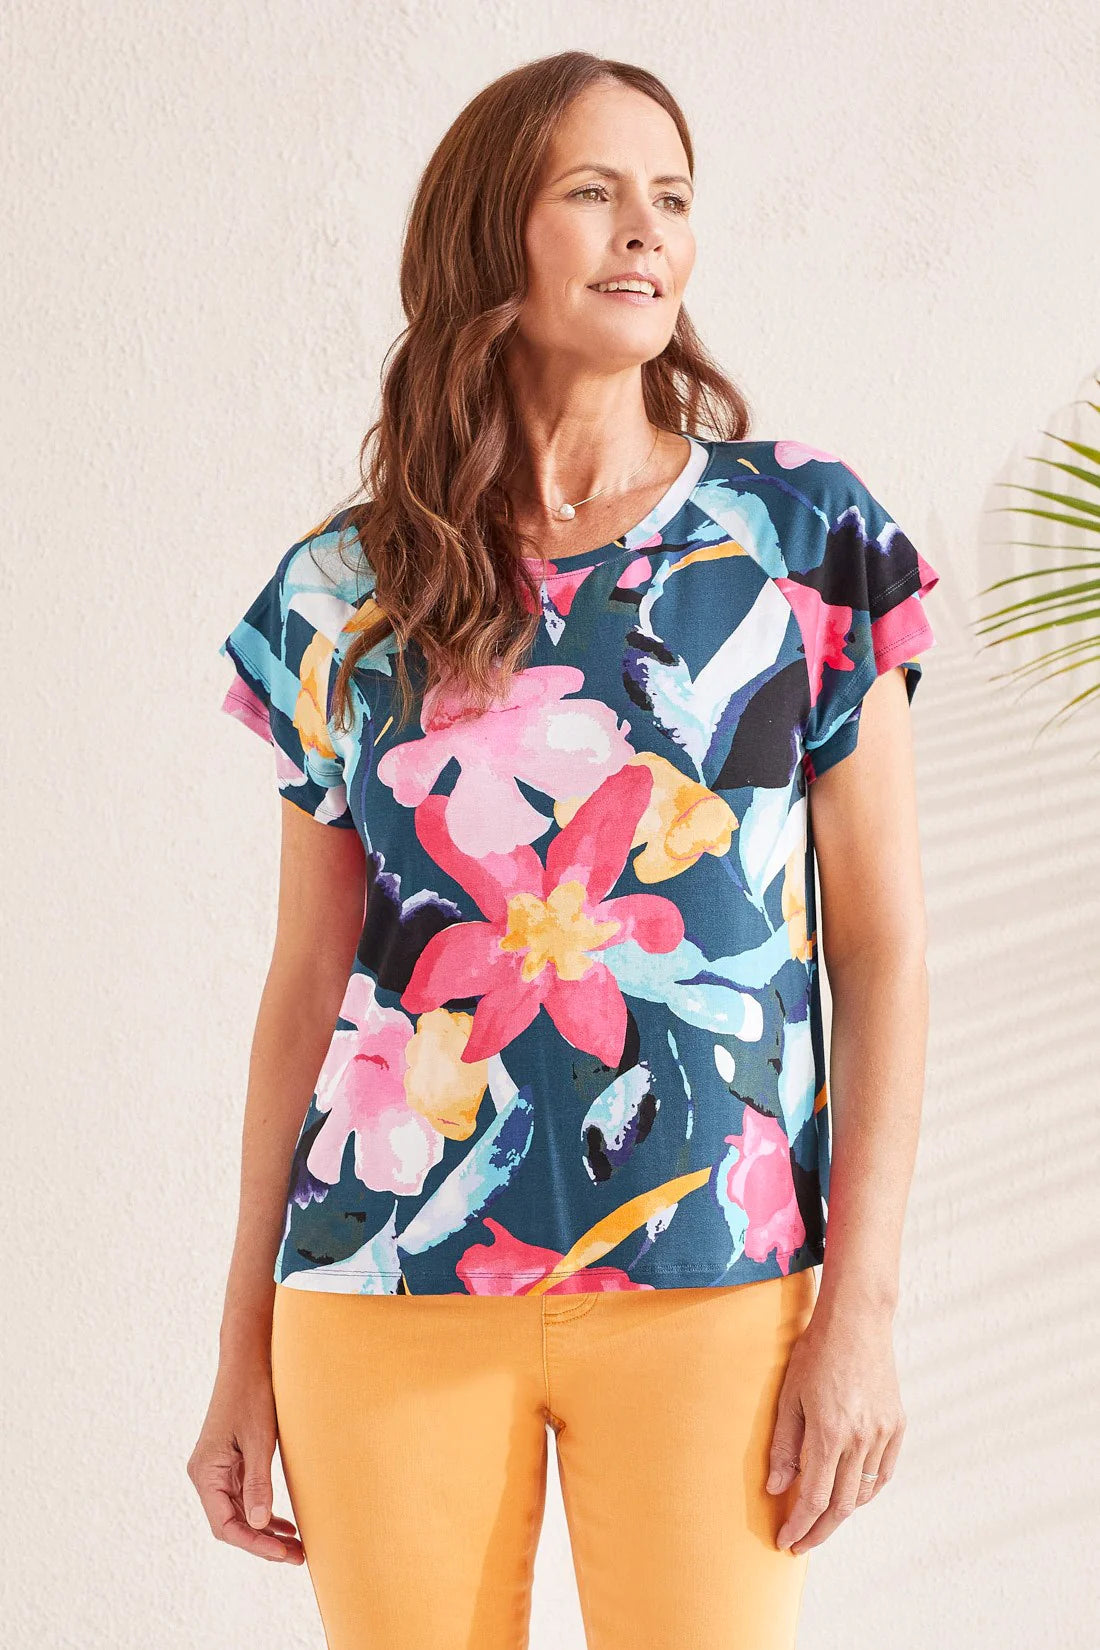 Women's Tops & Blouses – Broderick's Clothing Co.